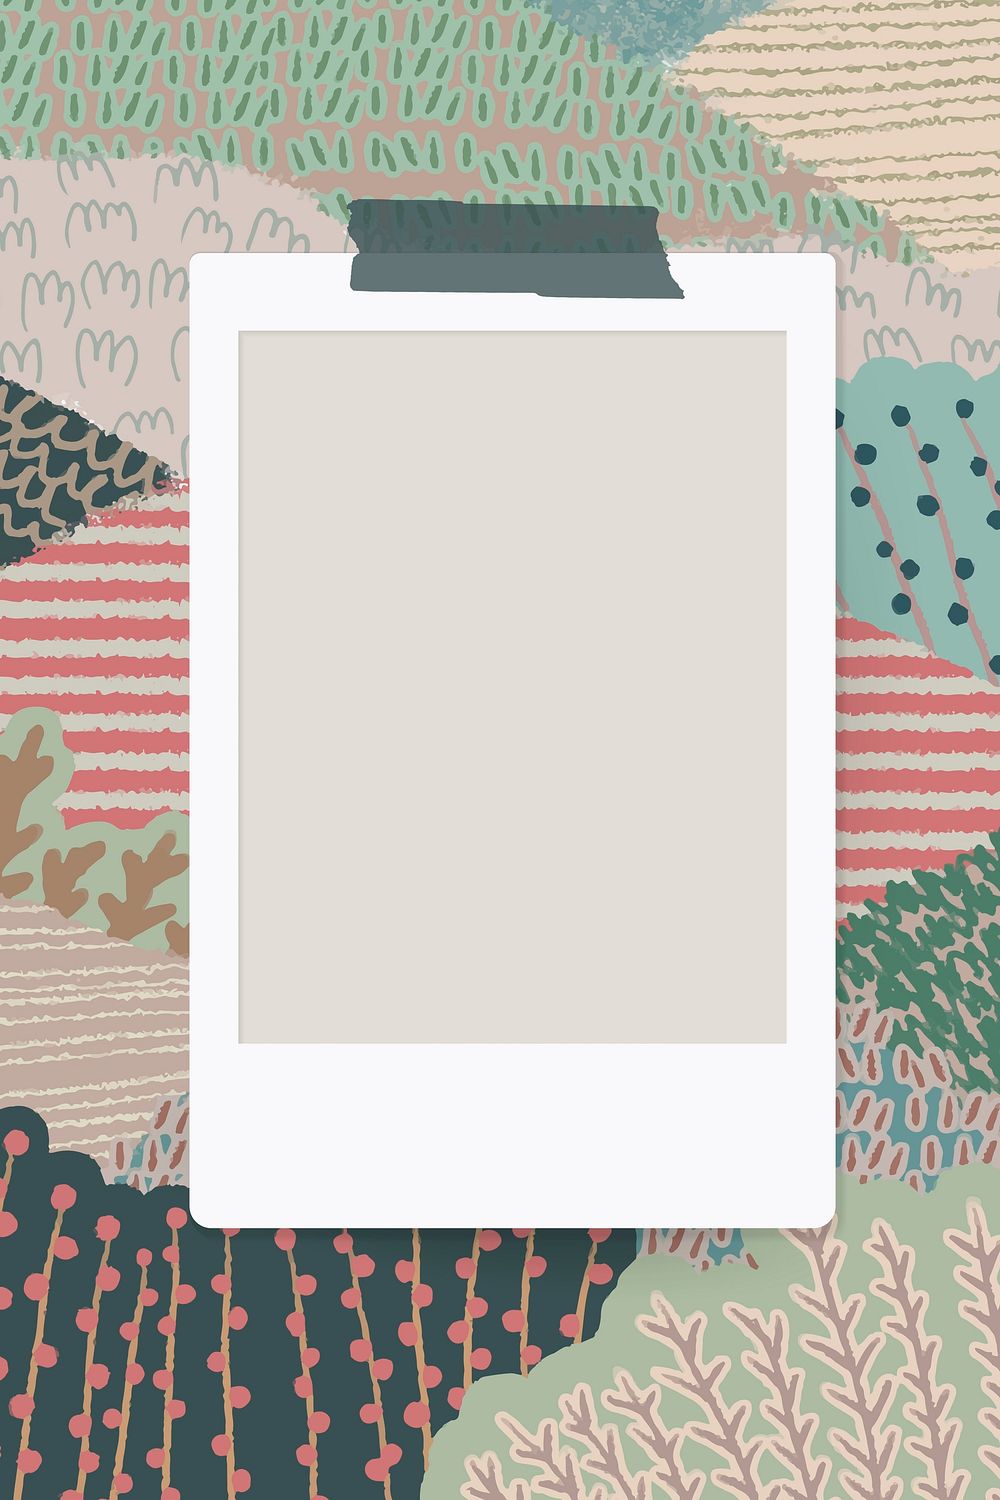 Blank photo frame on abstract | Premium Vector - rawpixel